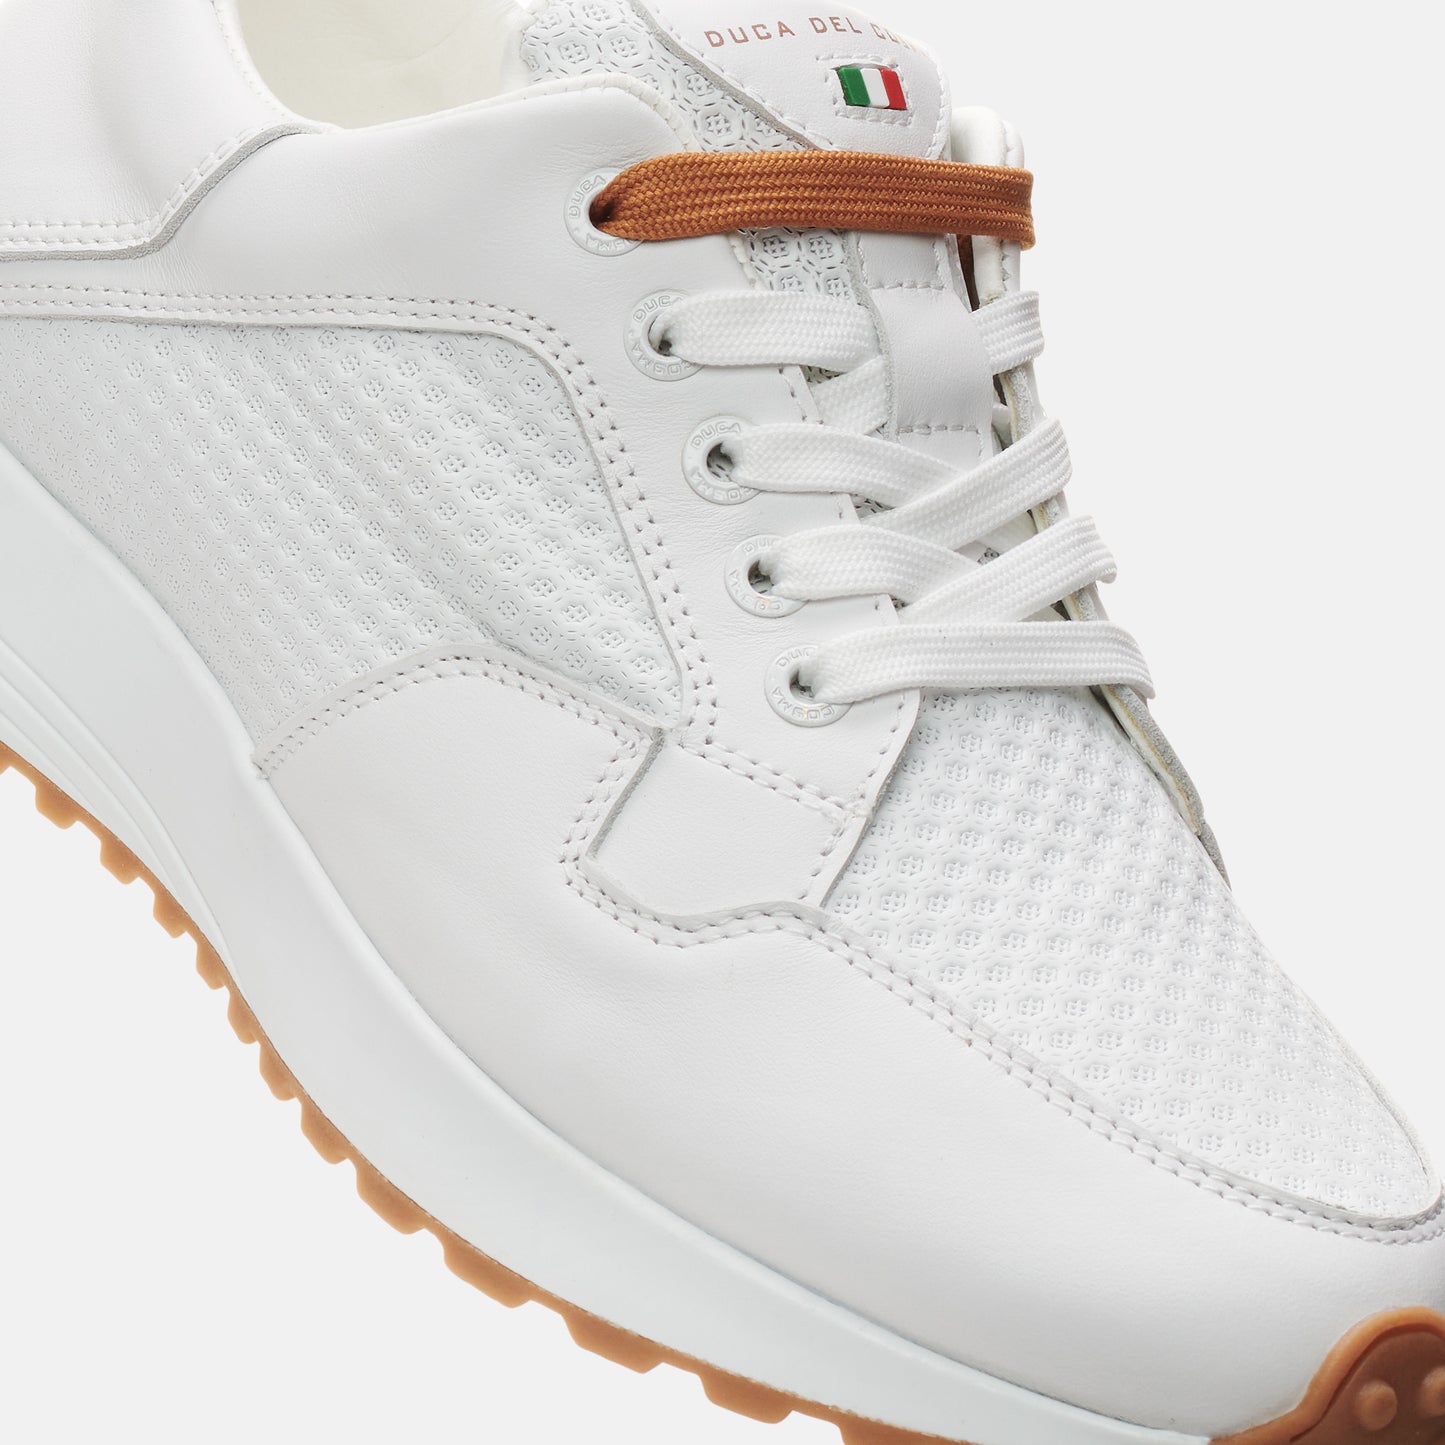 Boreal white Women's Golf Shoes Duca del Cosma Waterproof best golf shoe for the golf course  